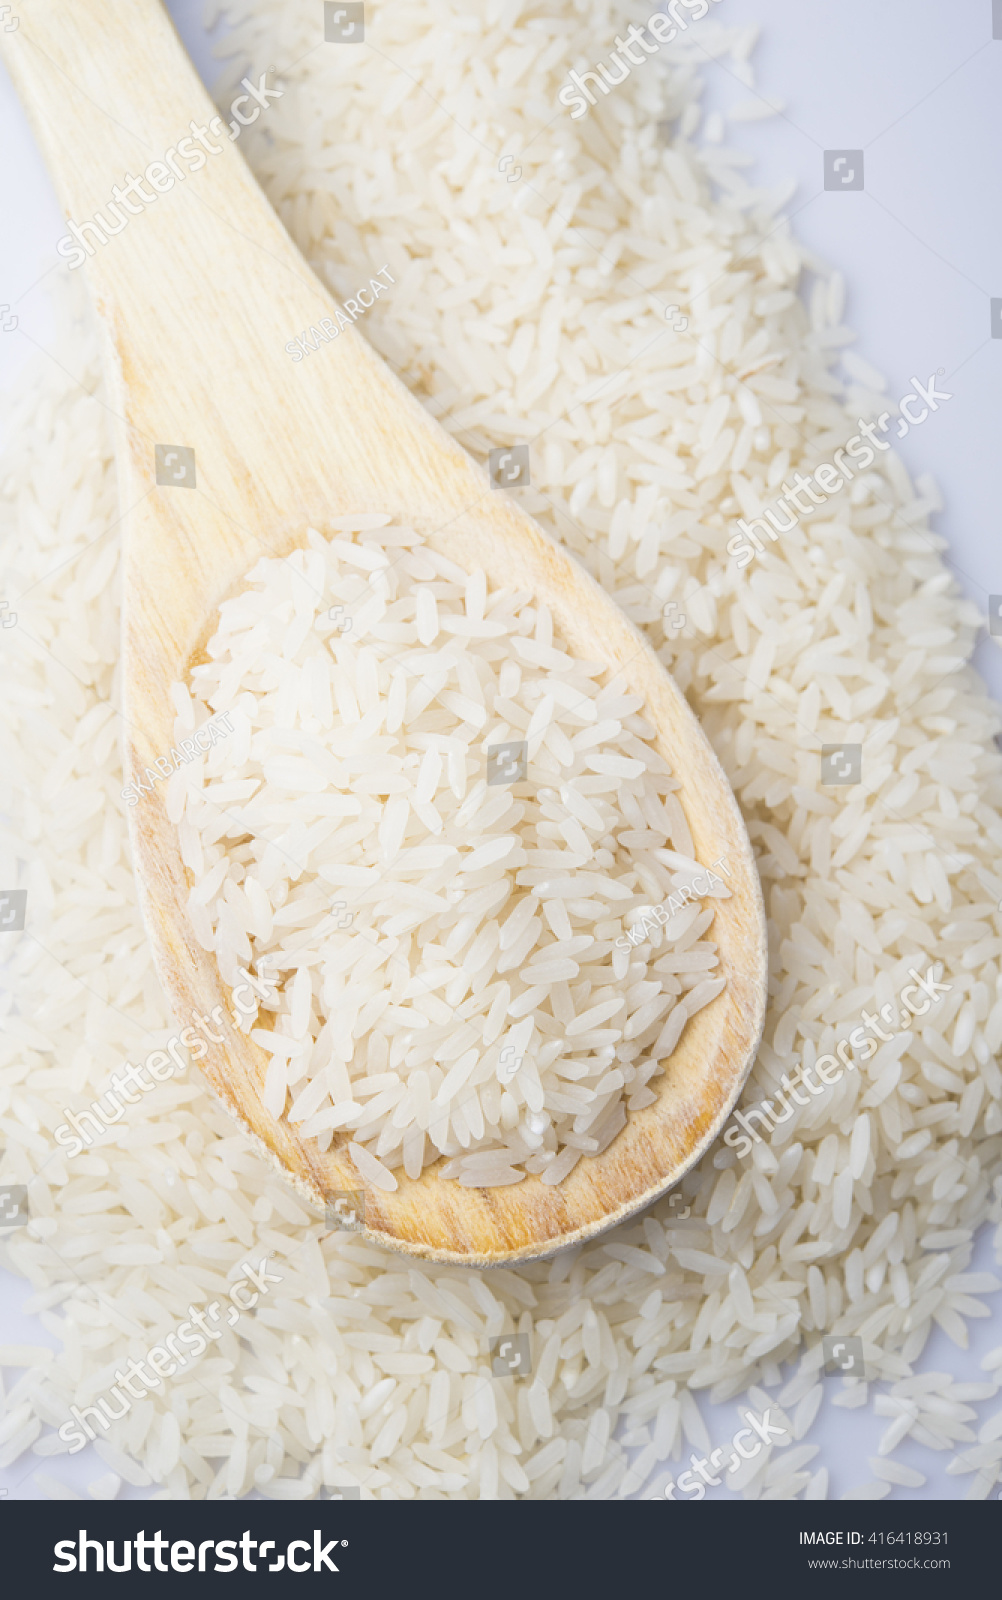 food background. brown rice in a wooden spoon. top view #416418931